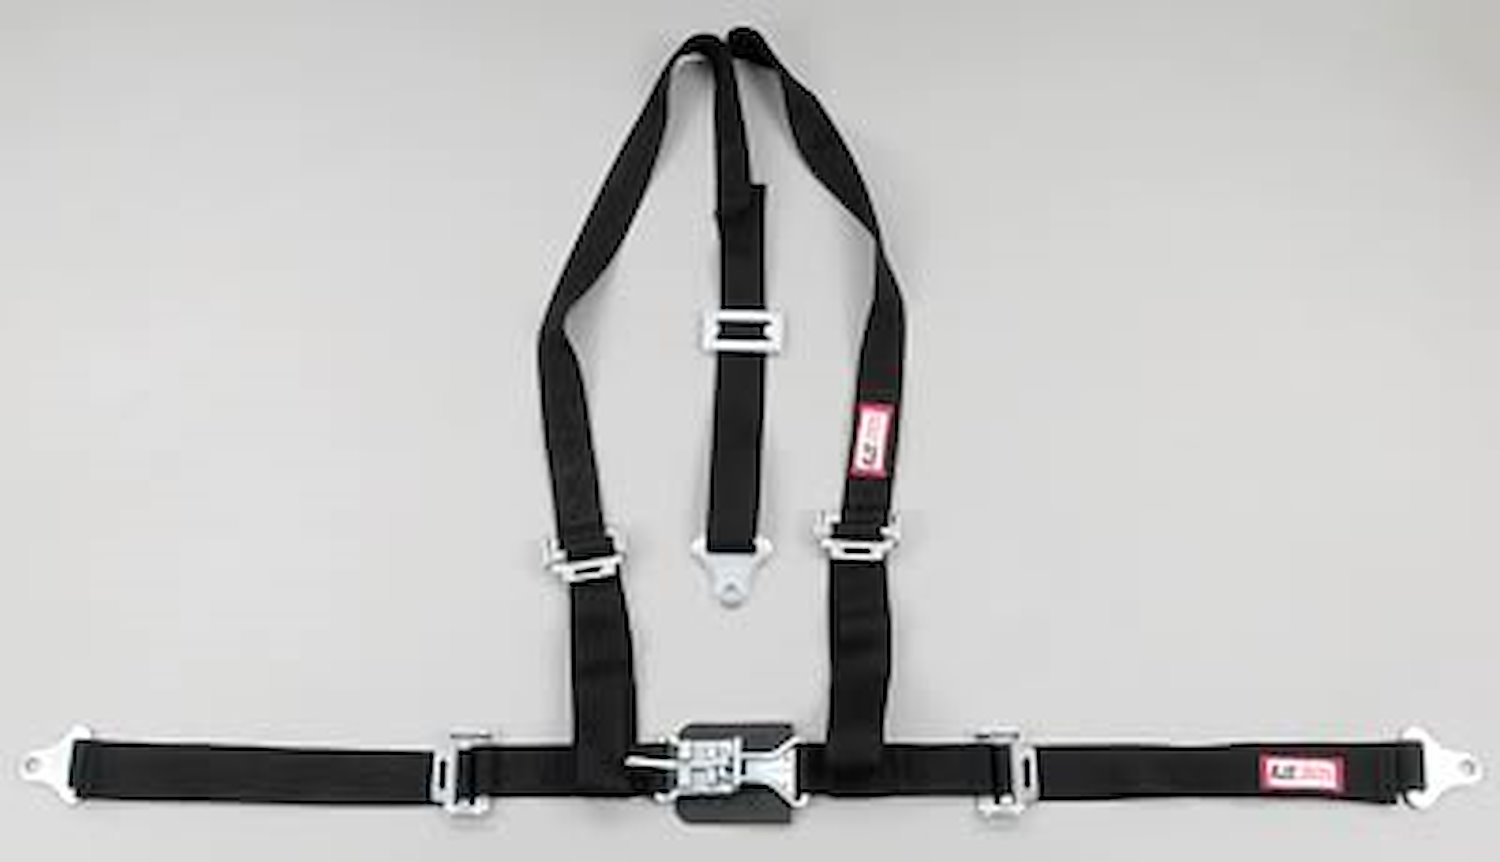 NON-SFI L&L HARNESS 2 PULL DOWN Lap Belt w/Adjuster 2 S.H. Individual FLOOR Mount ALL WRAP ENDS YELLOW